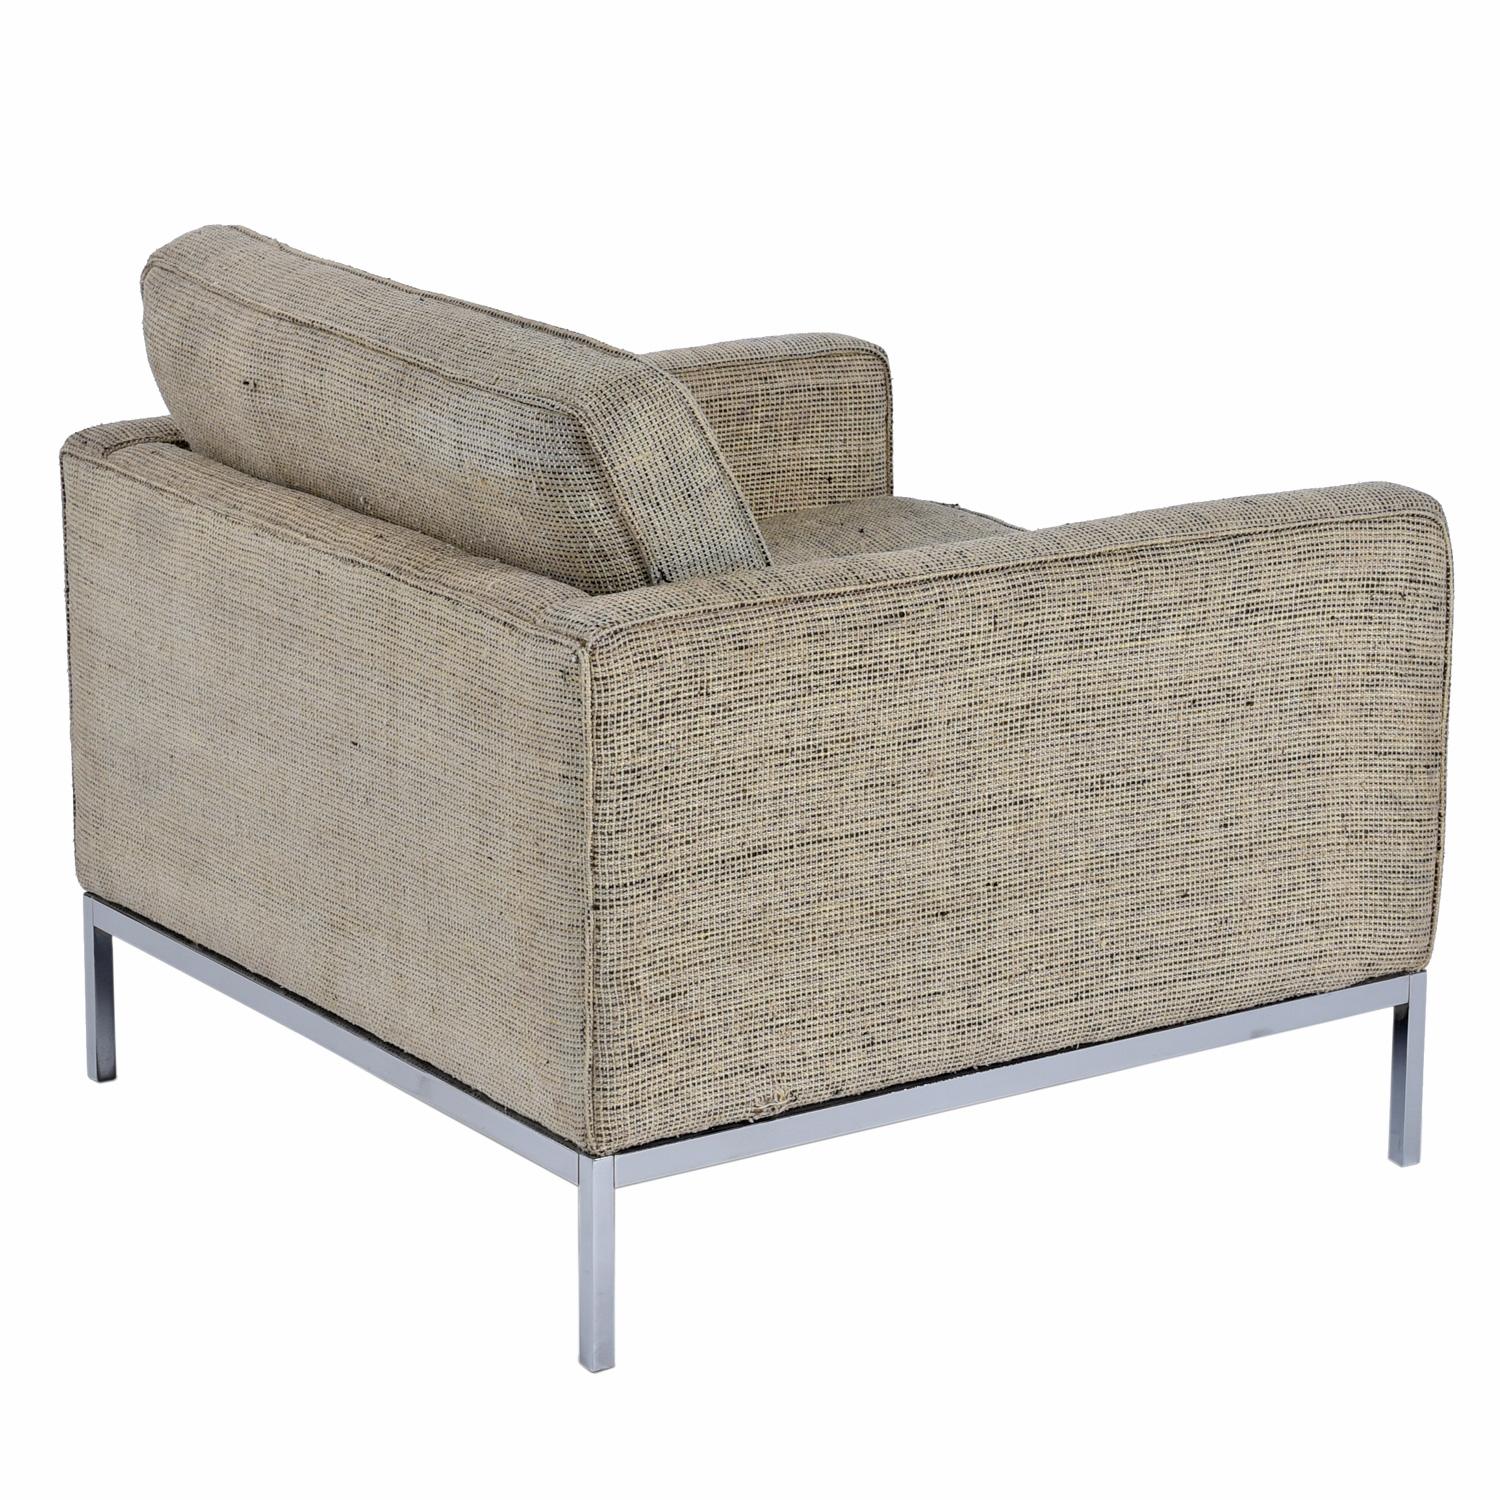 Mid-Century Modern Florence Knoll Lounge Chair on Steel Base in Heather Grey Tweed Fabric For Sale